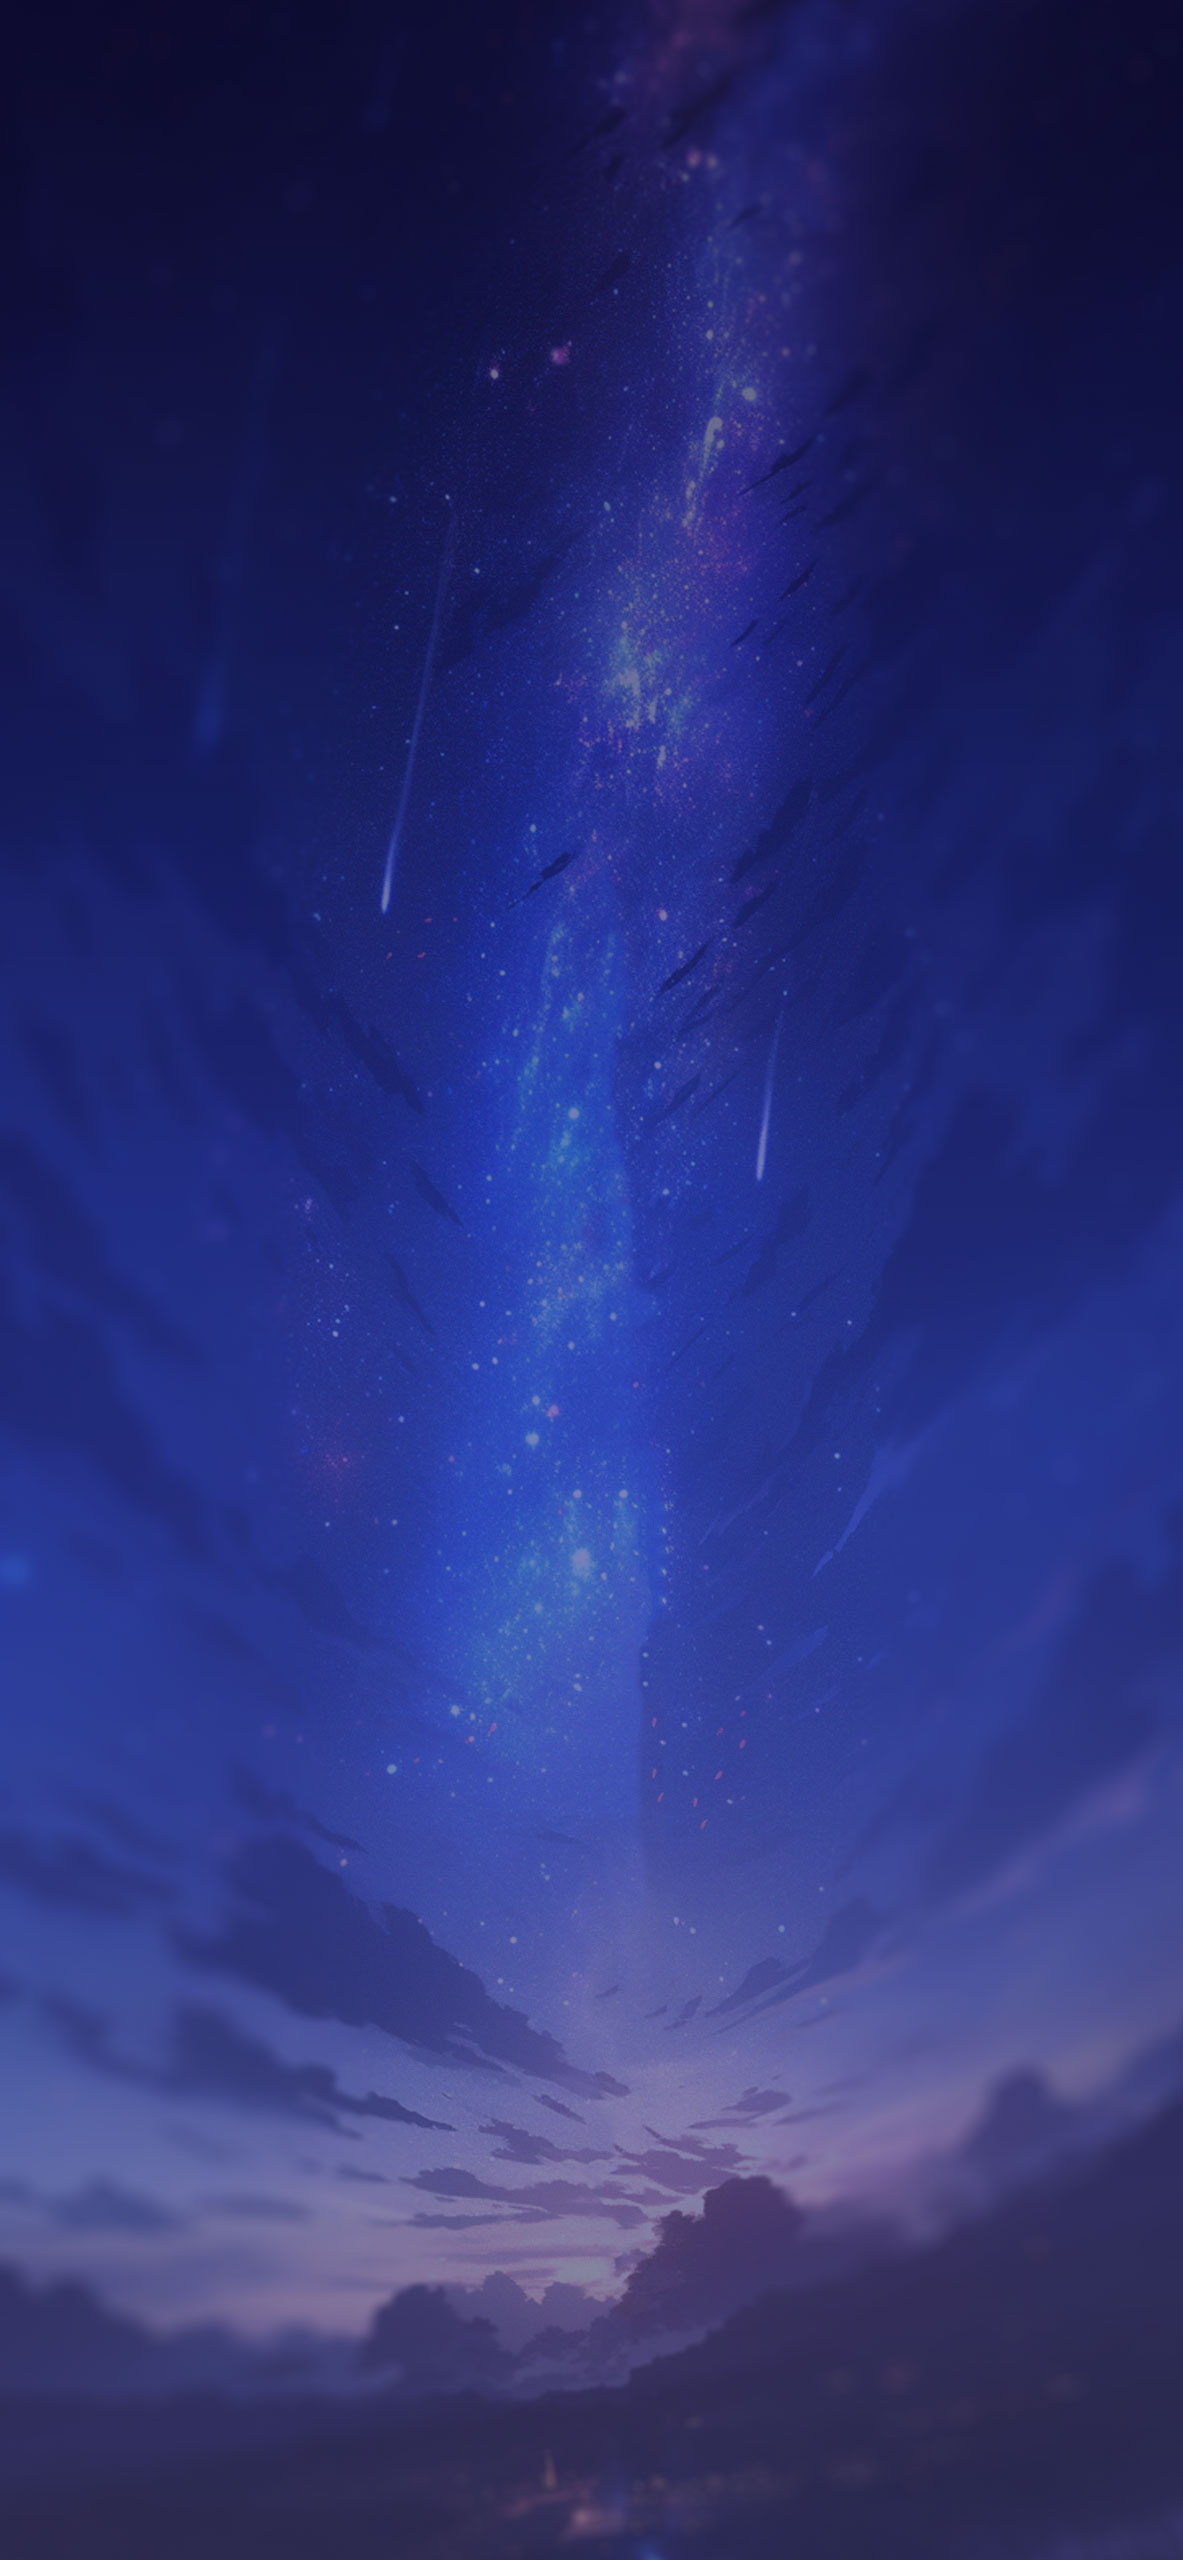 Milky Way Wallpaper 4K, Galaxy, Starry sky, Outer space